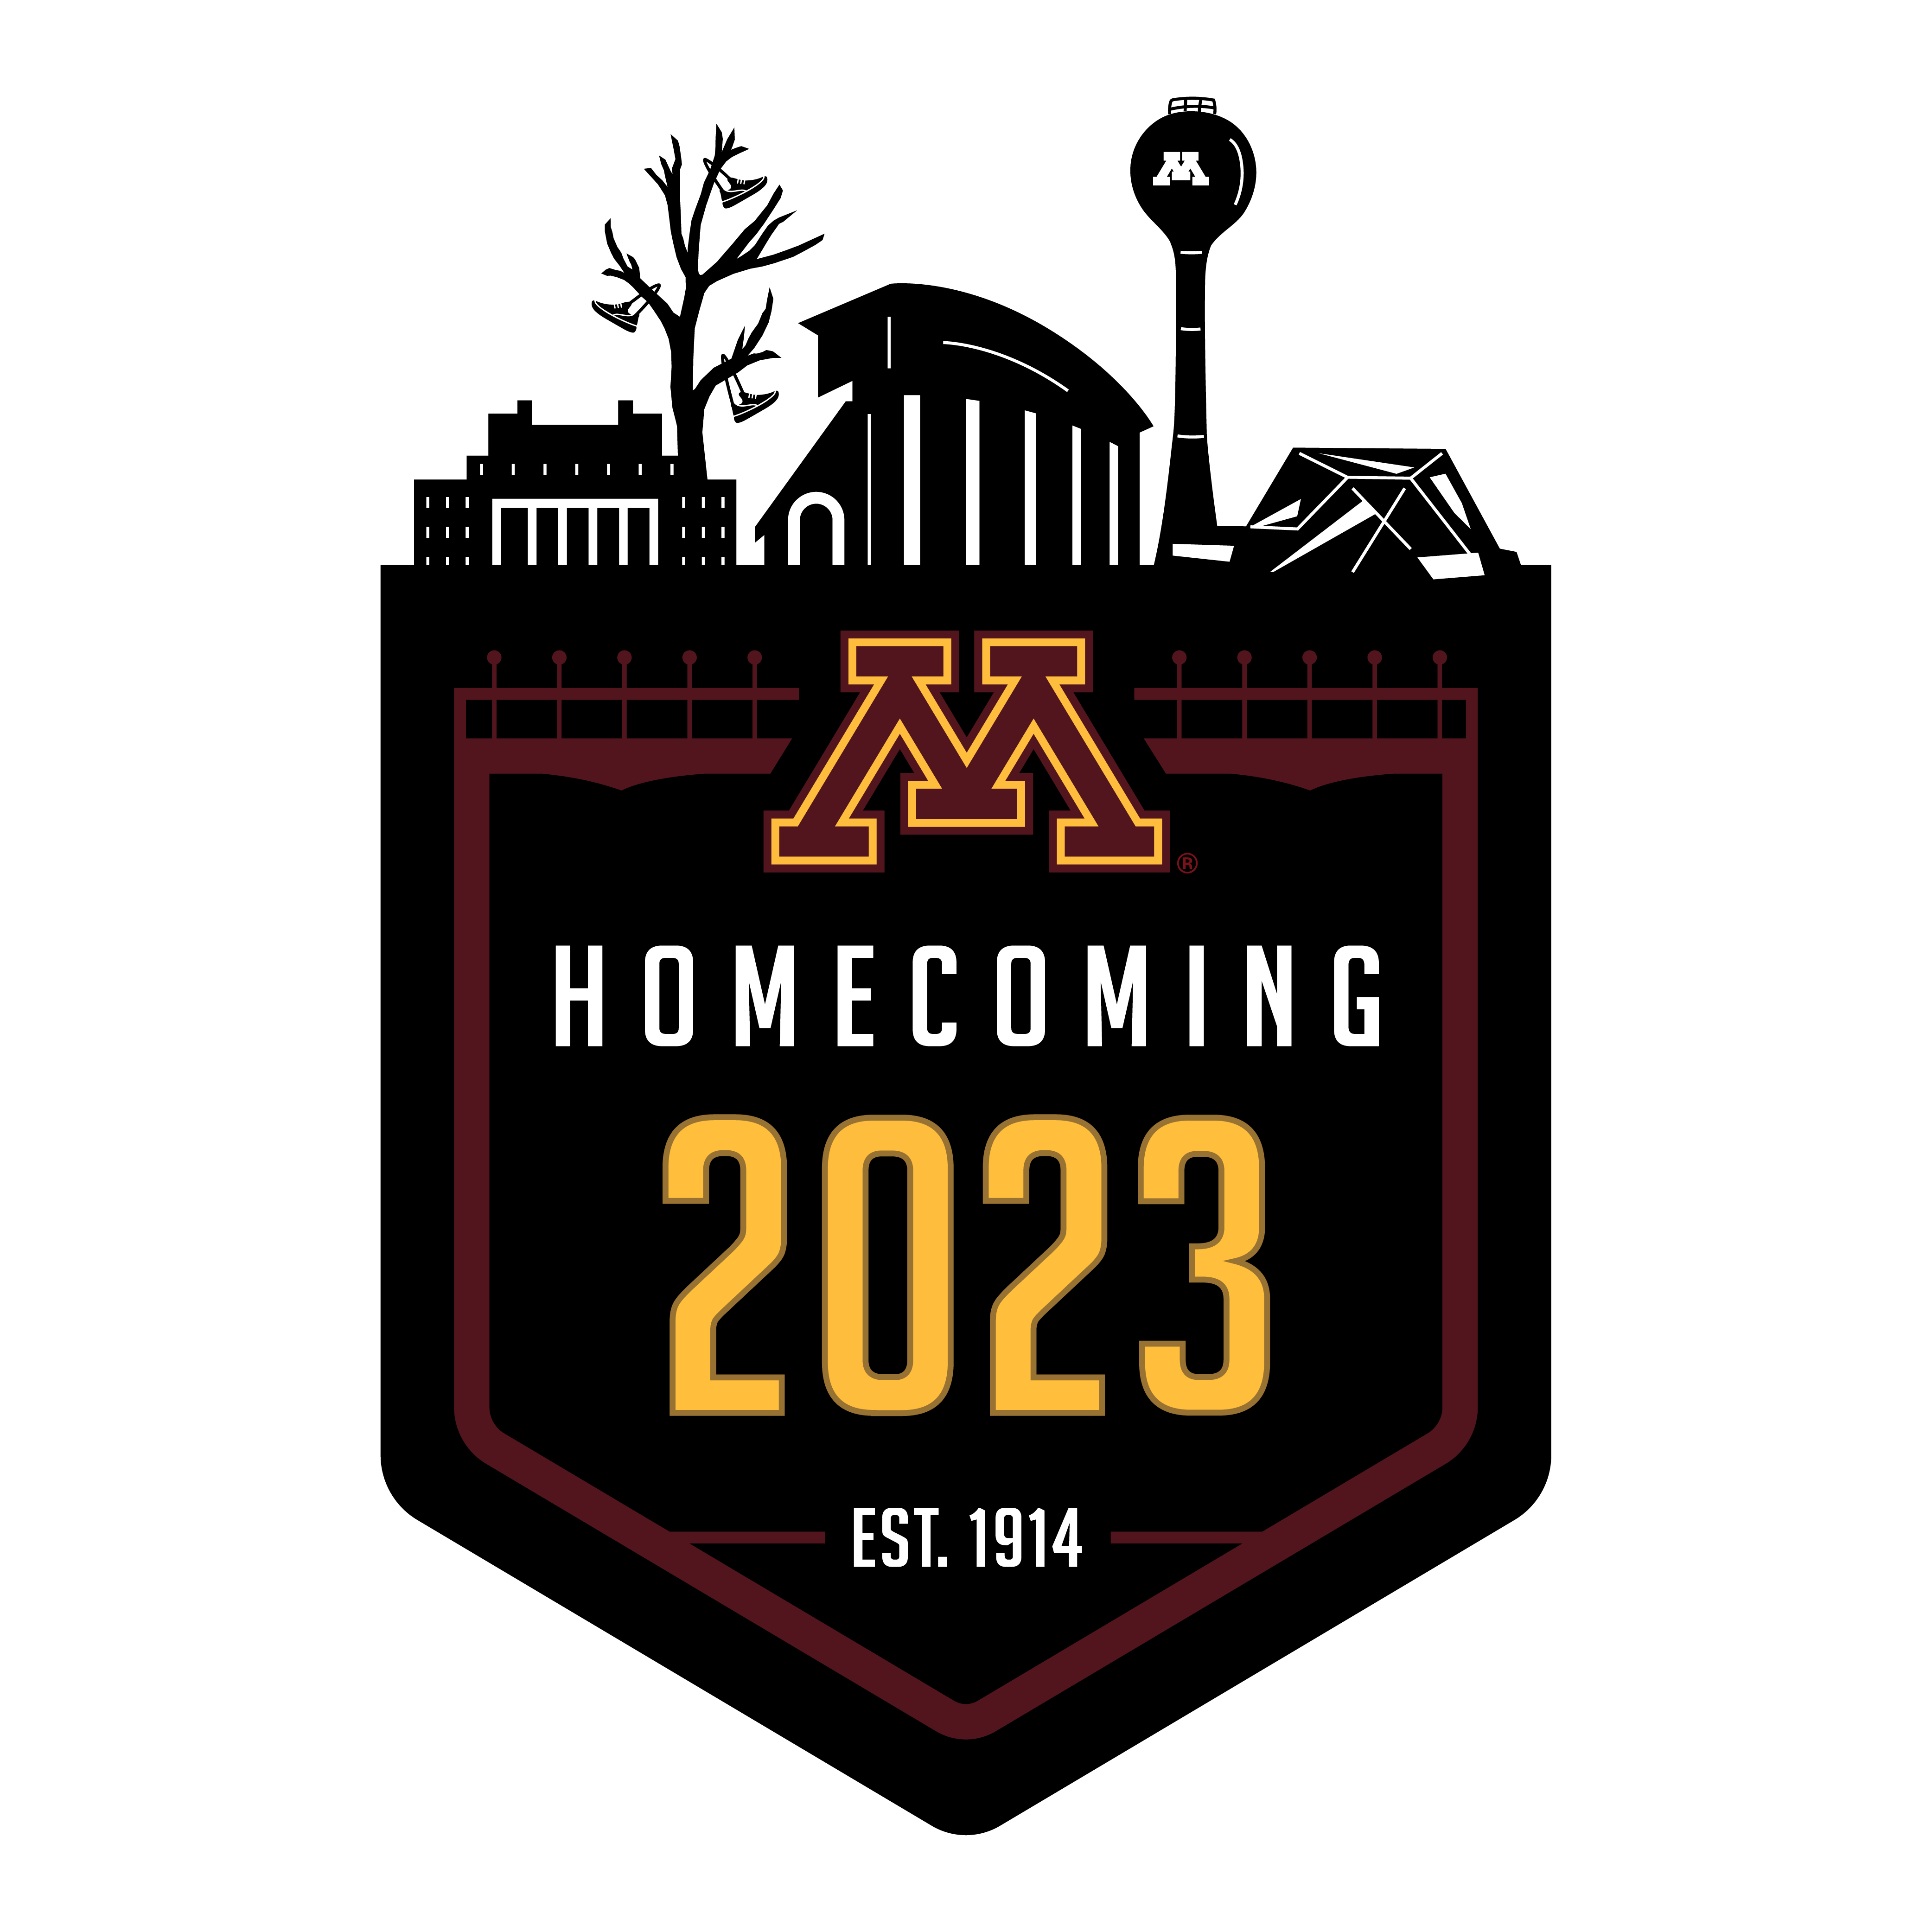 Homecoming logo full color